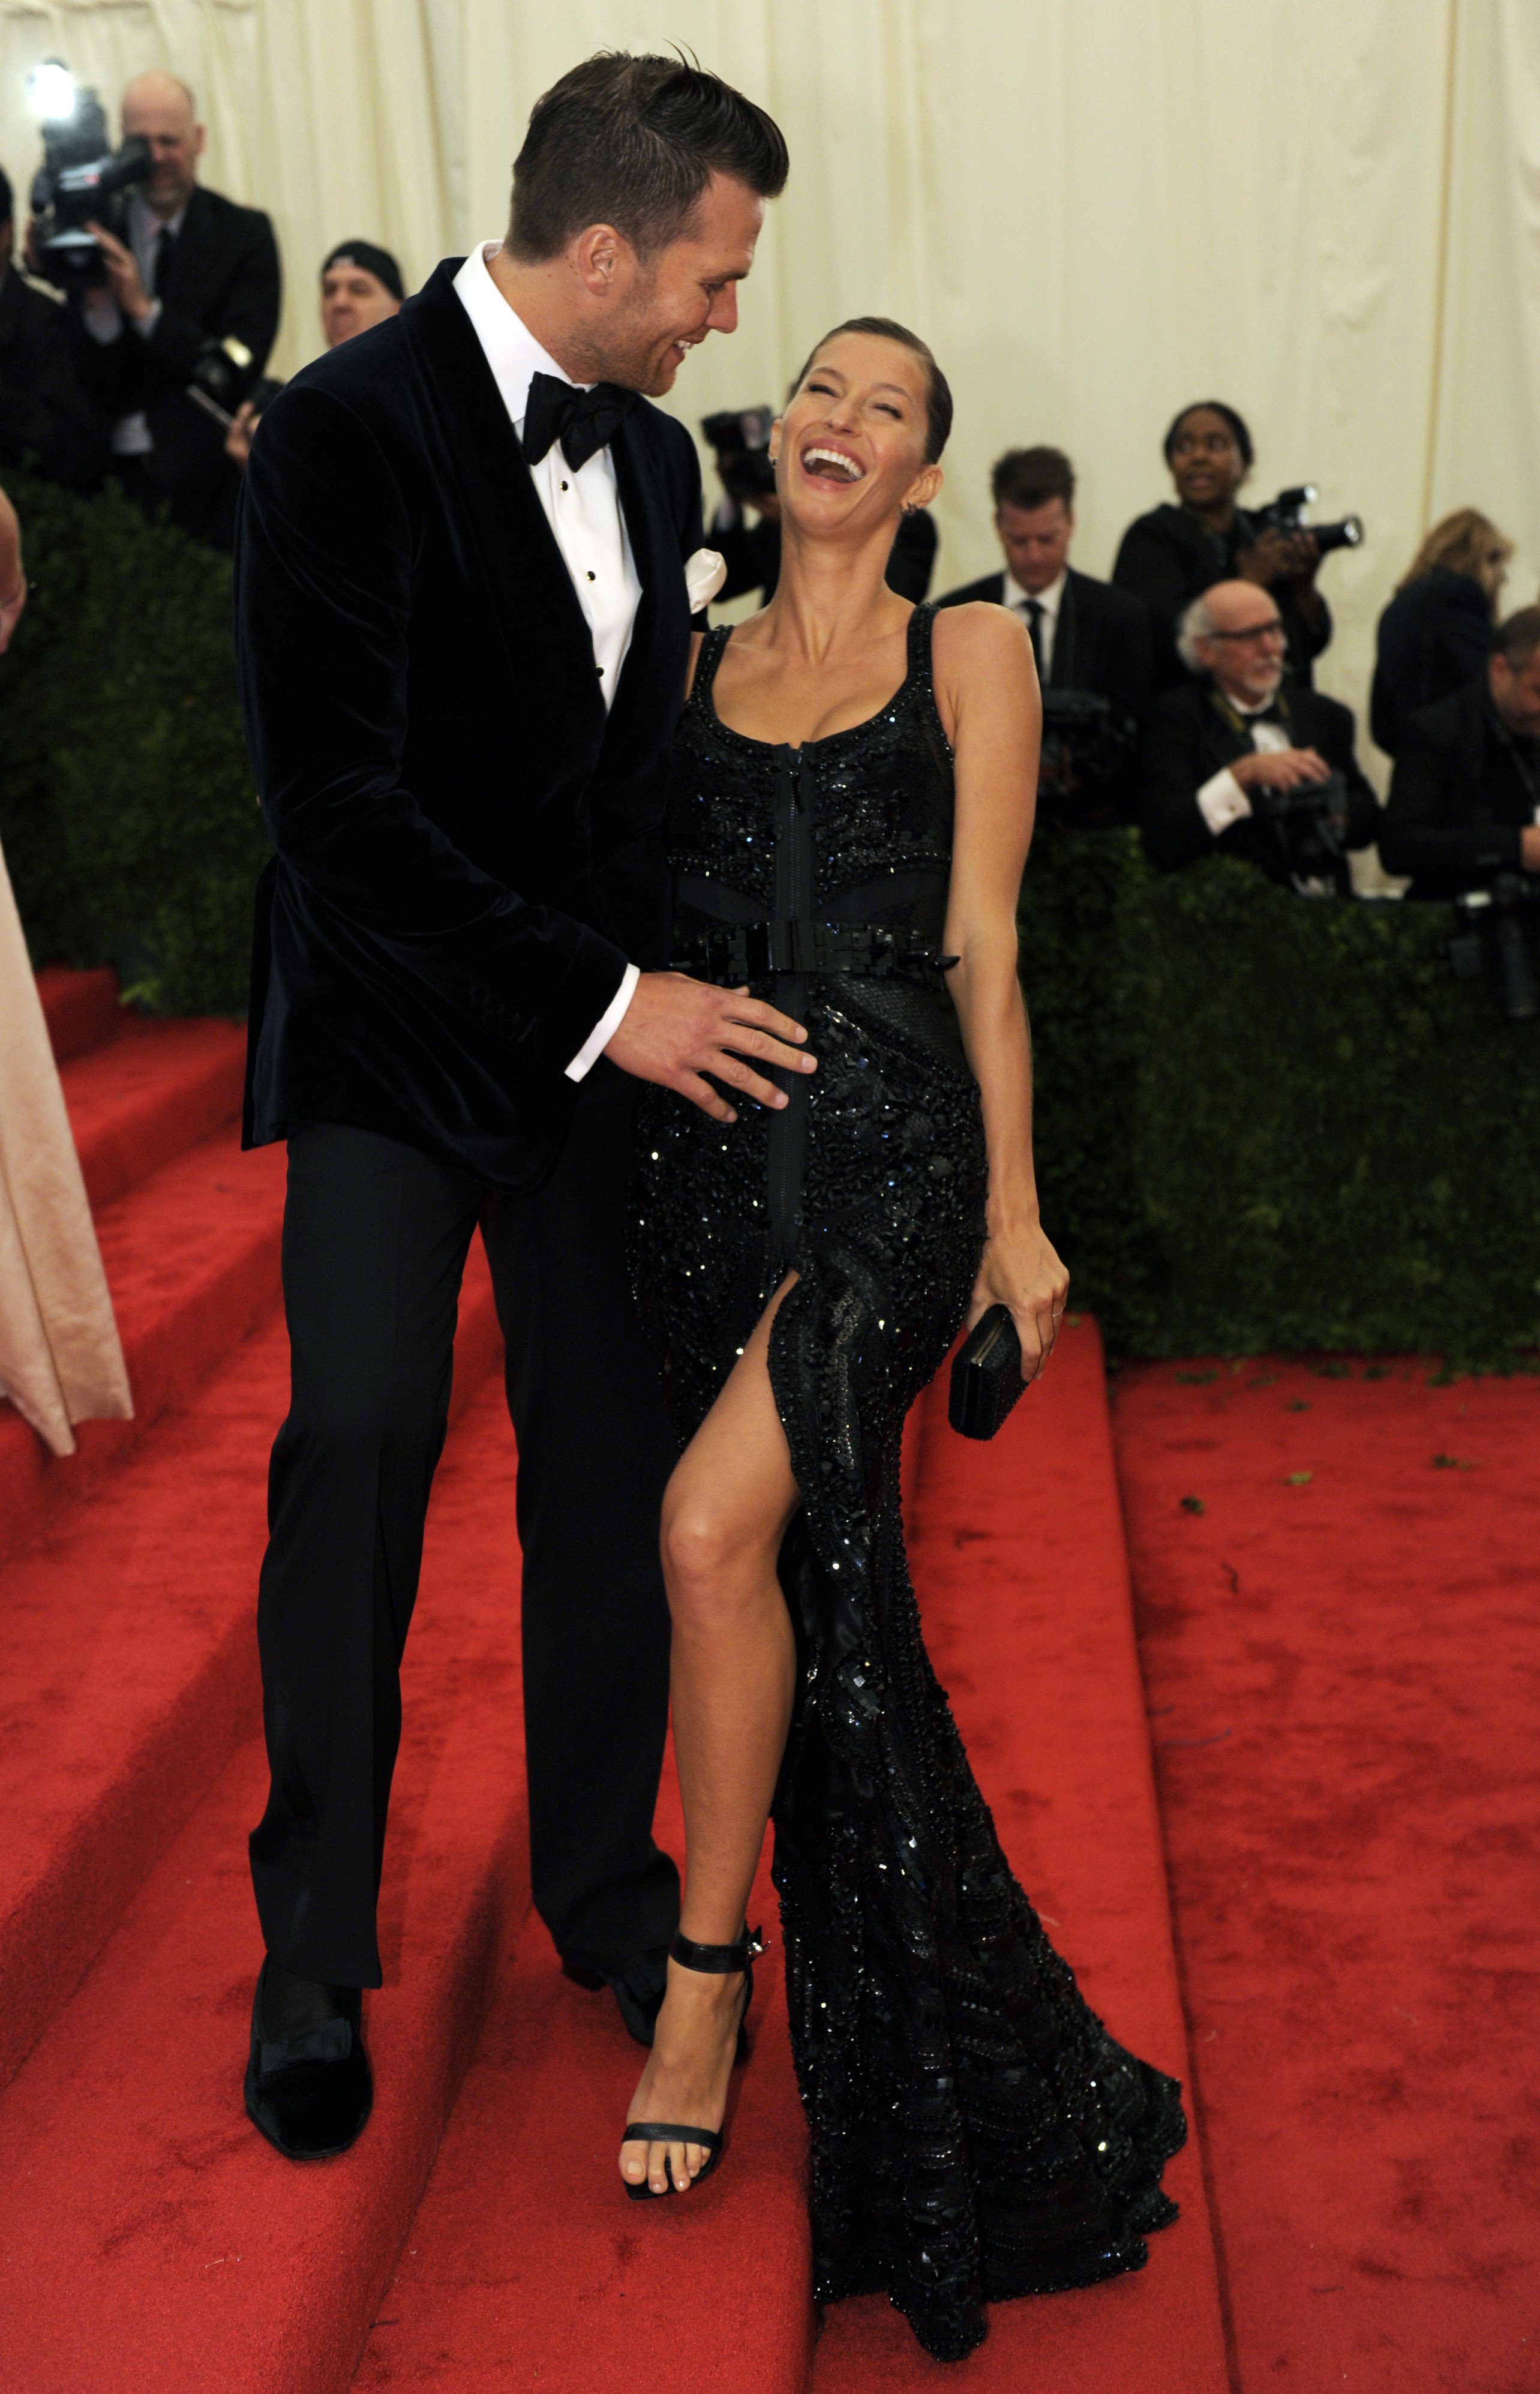 Tom Brady And Bridget Moynahan 5 Facts You Need To Know 6866